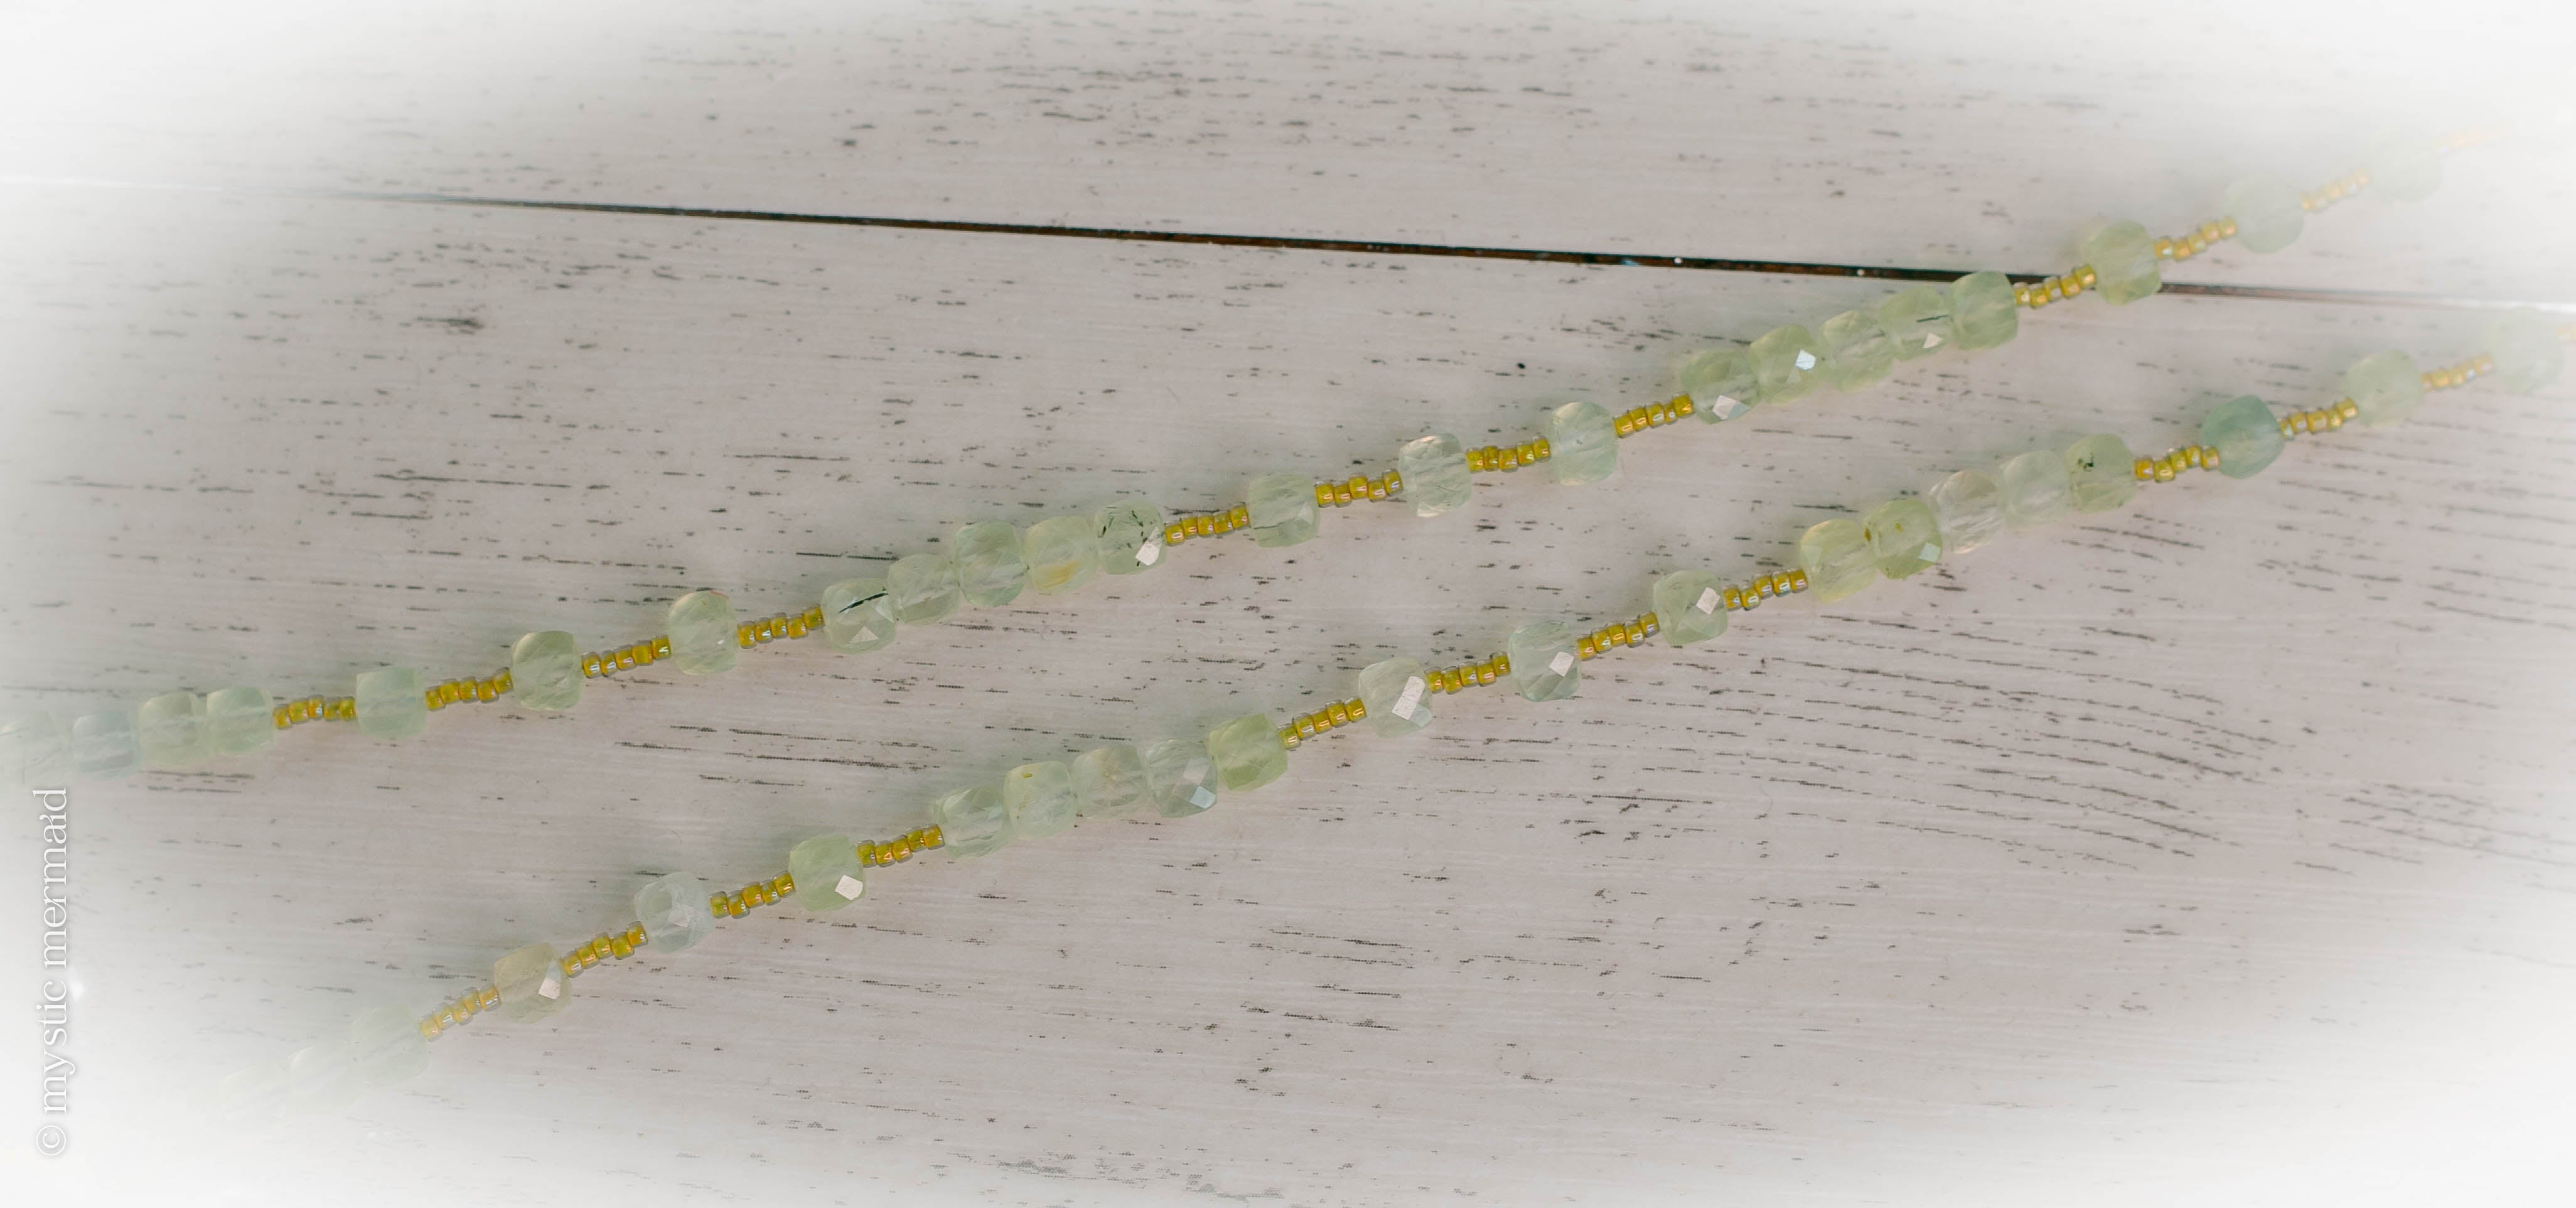 Prehnite Square Faceted Crystal Necklace